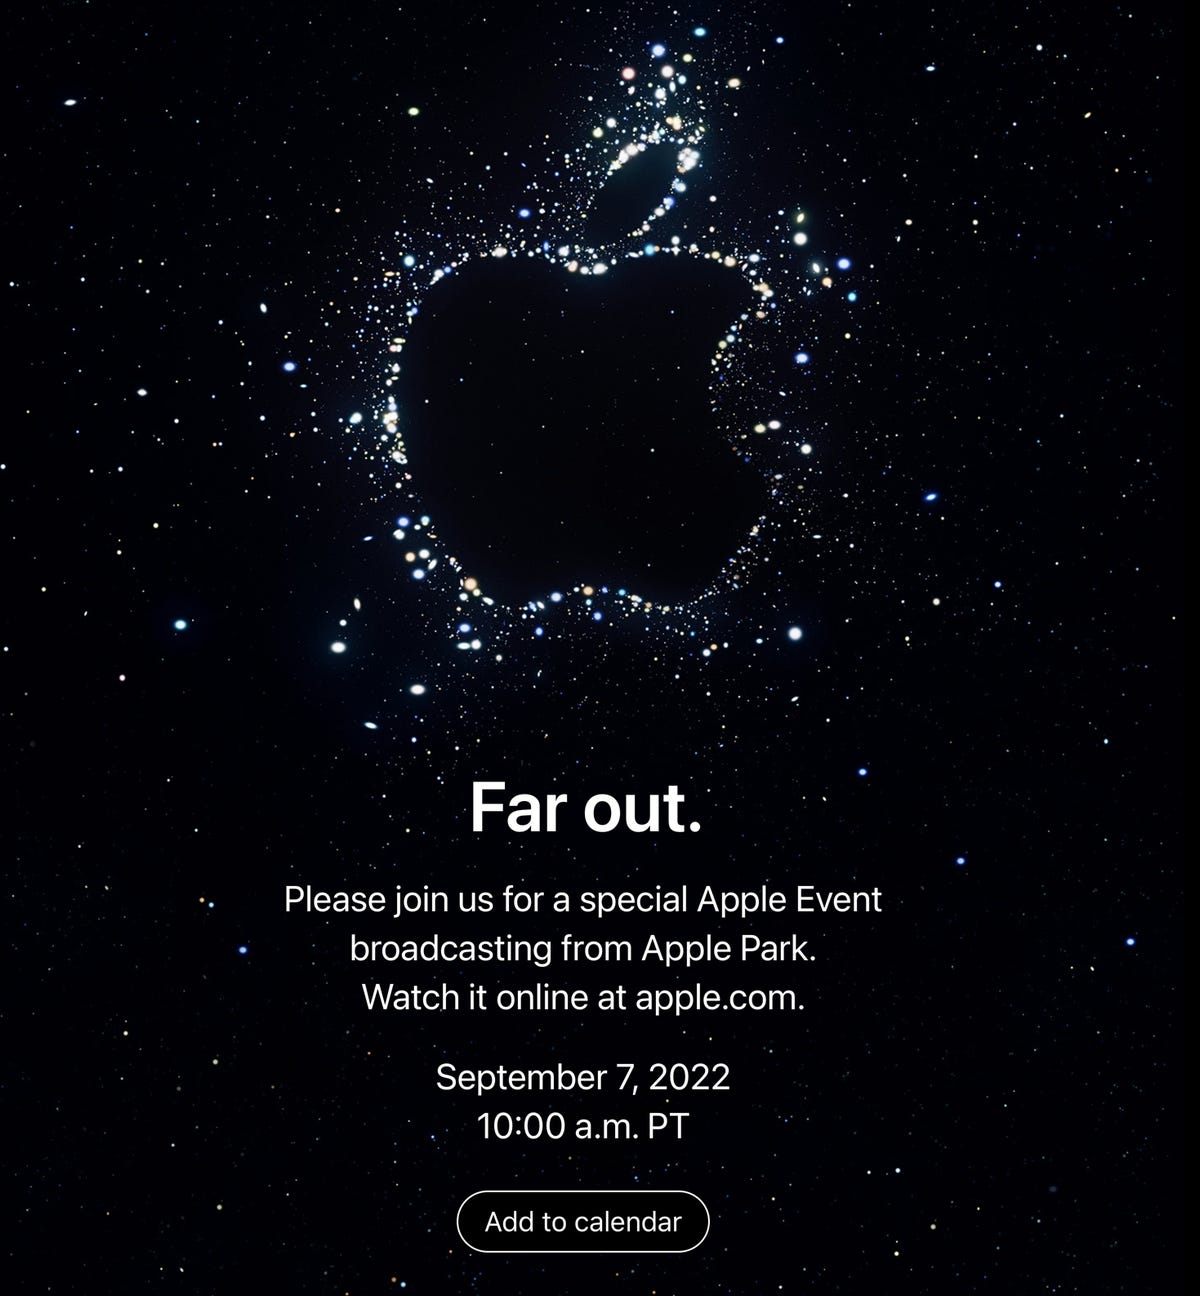 Apple Event invite saying Far out